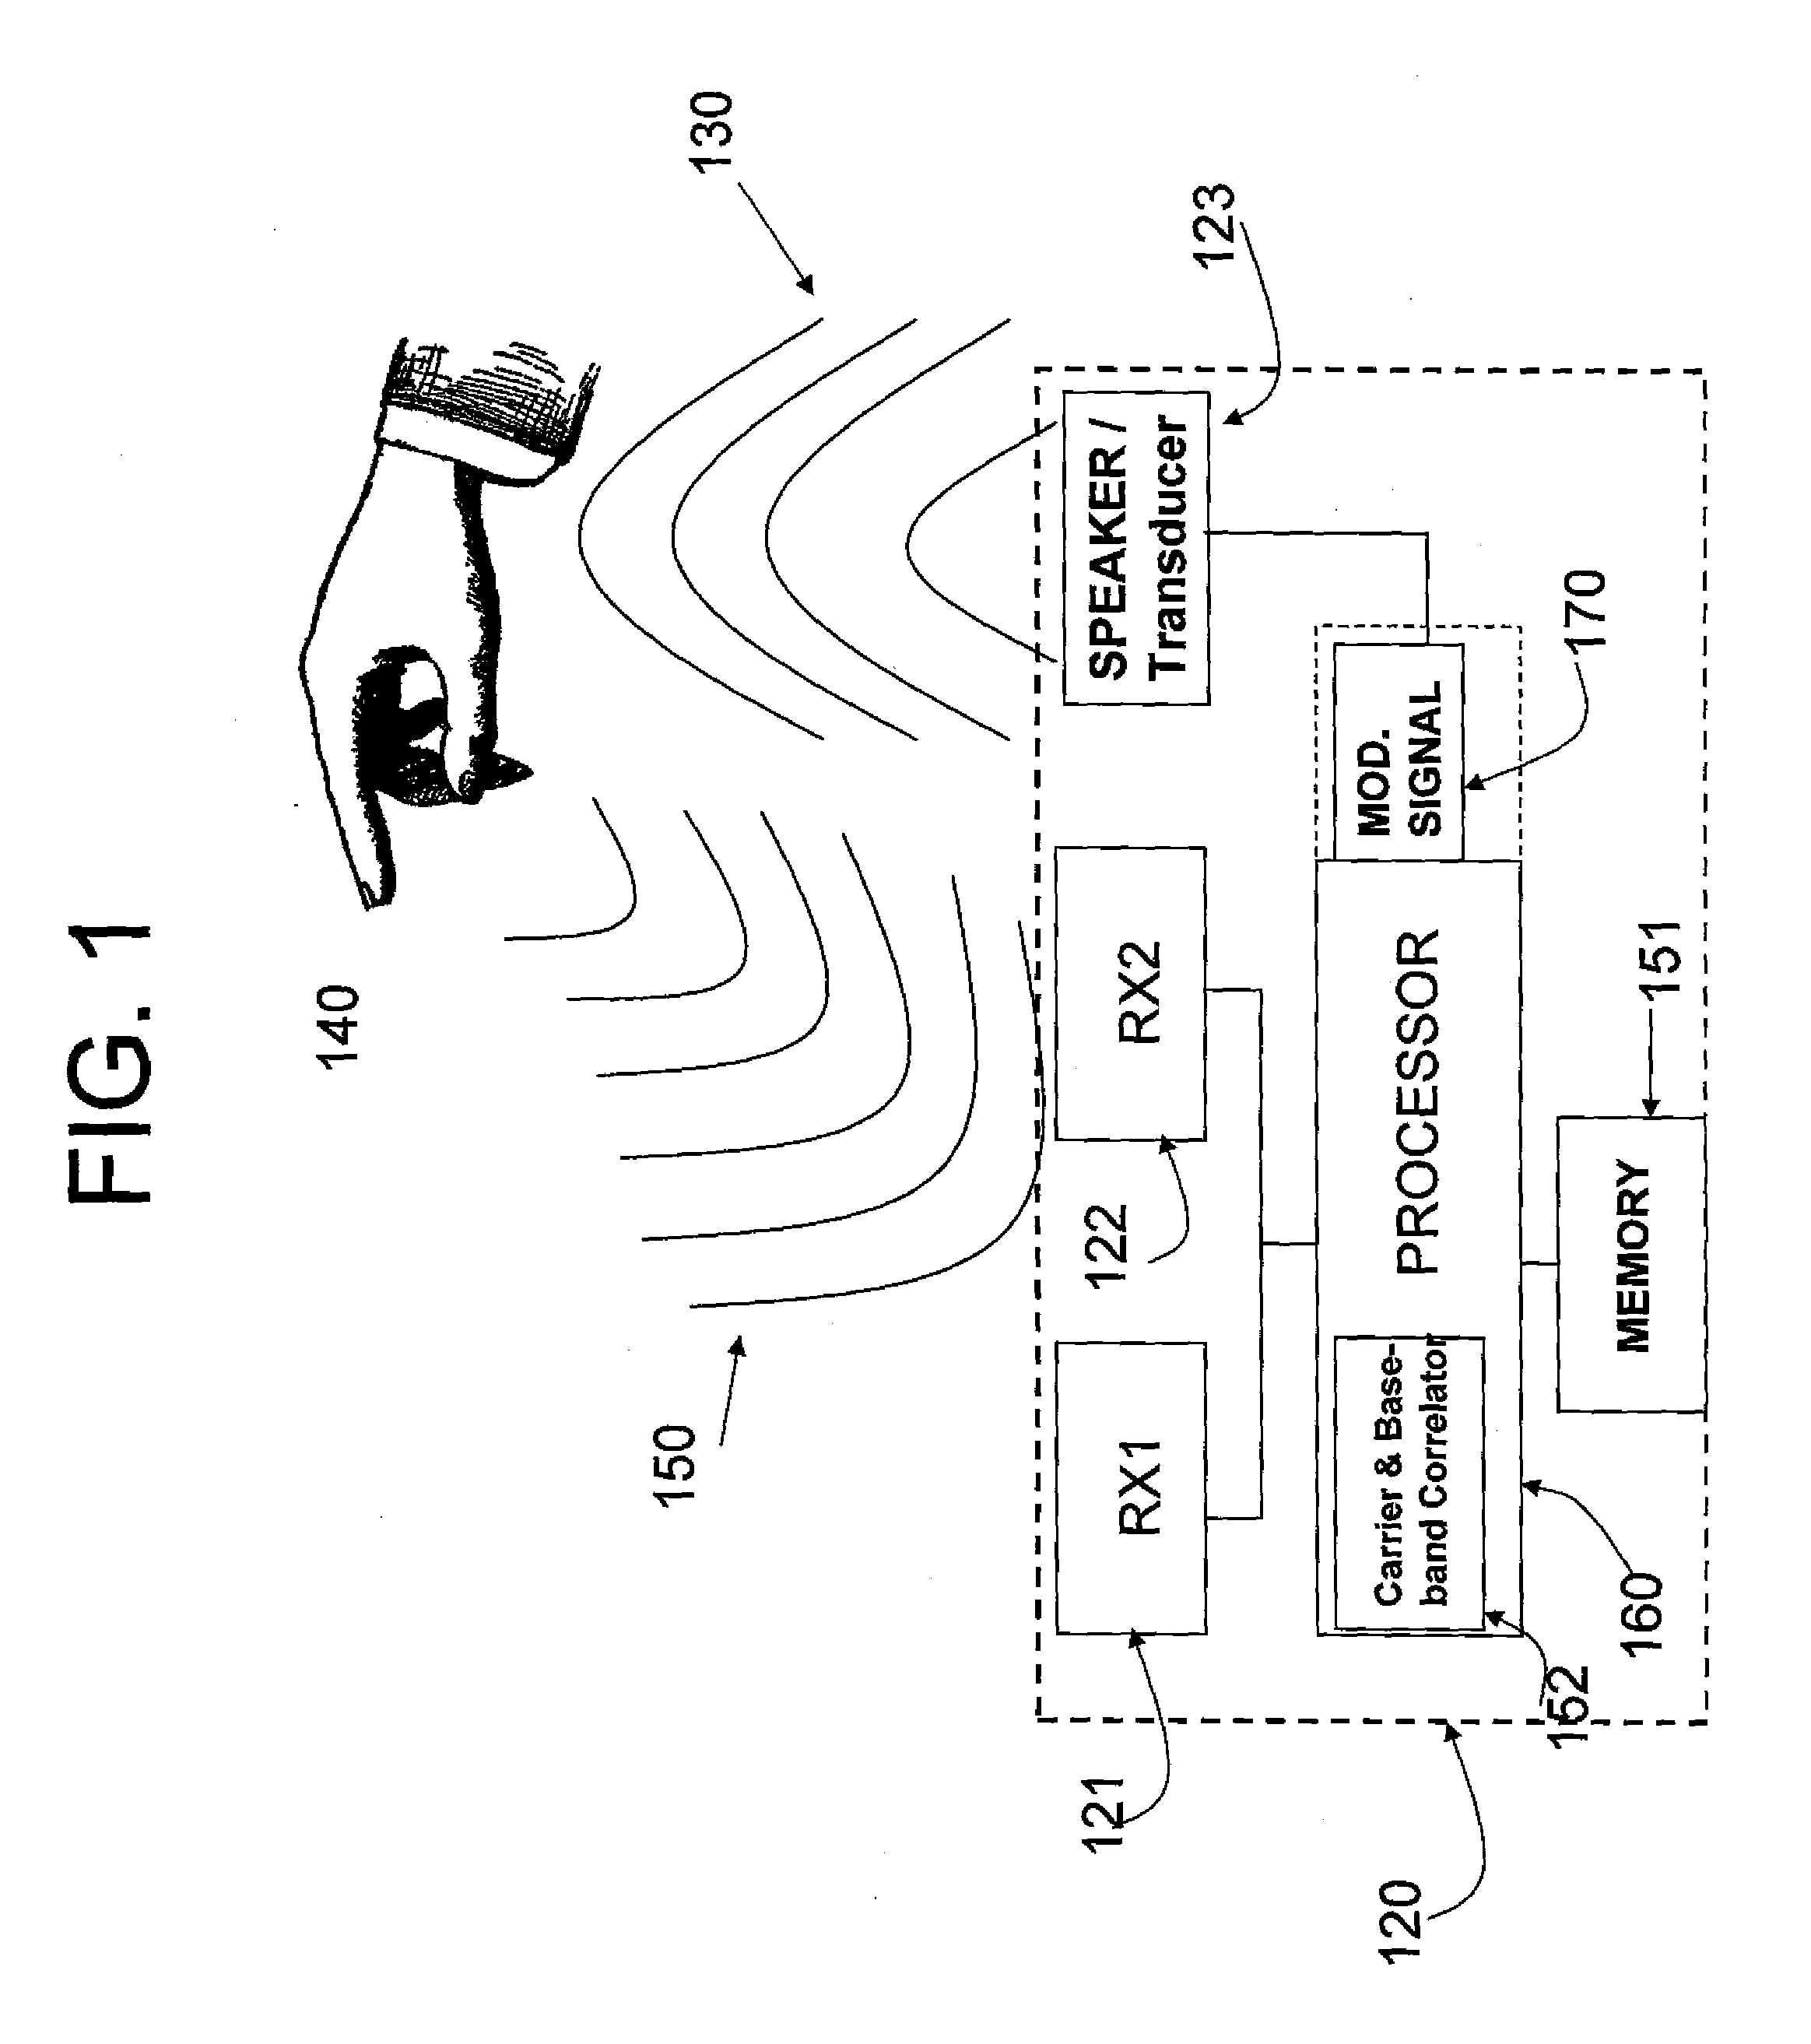 System and method for object position estimation based on ultrasonic reflected signals